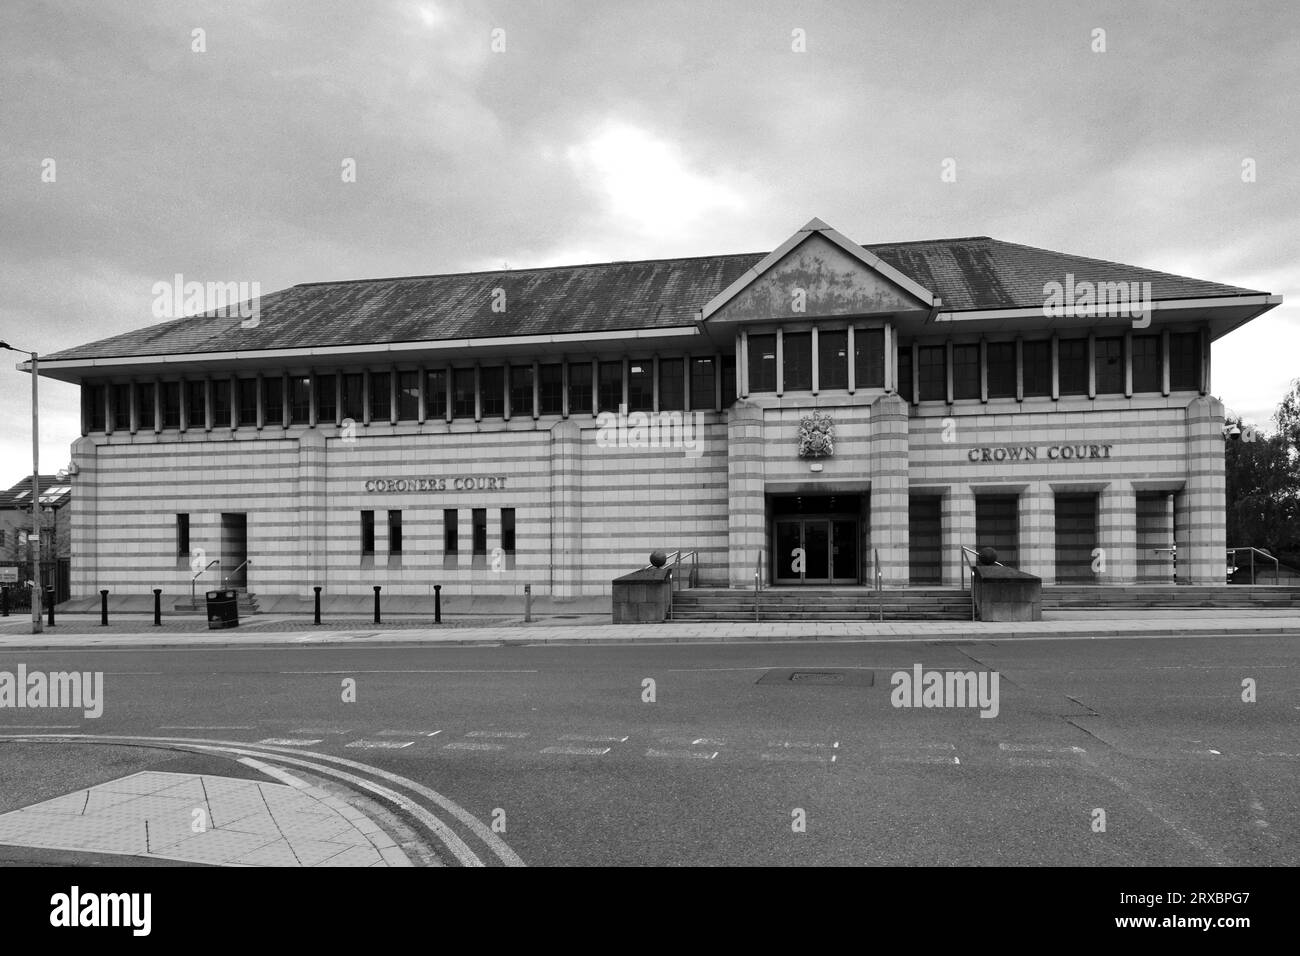 Il Crown Court Building, Doncaster Town, South Yorkshire, Inghilterra, Regno Unito Foto Stock